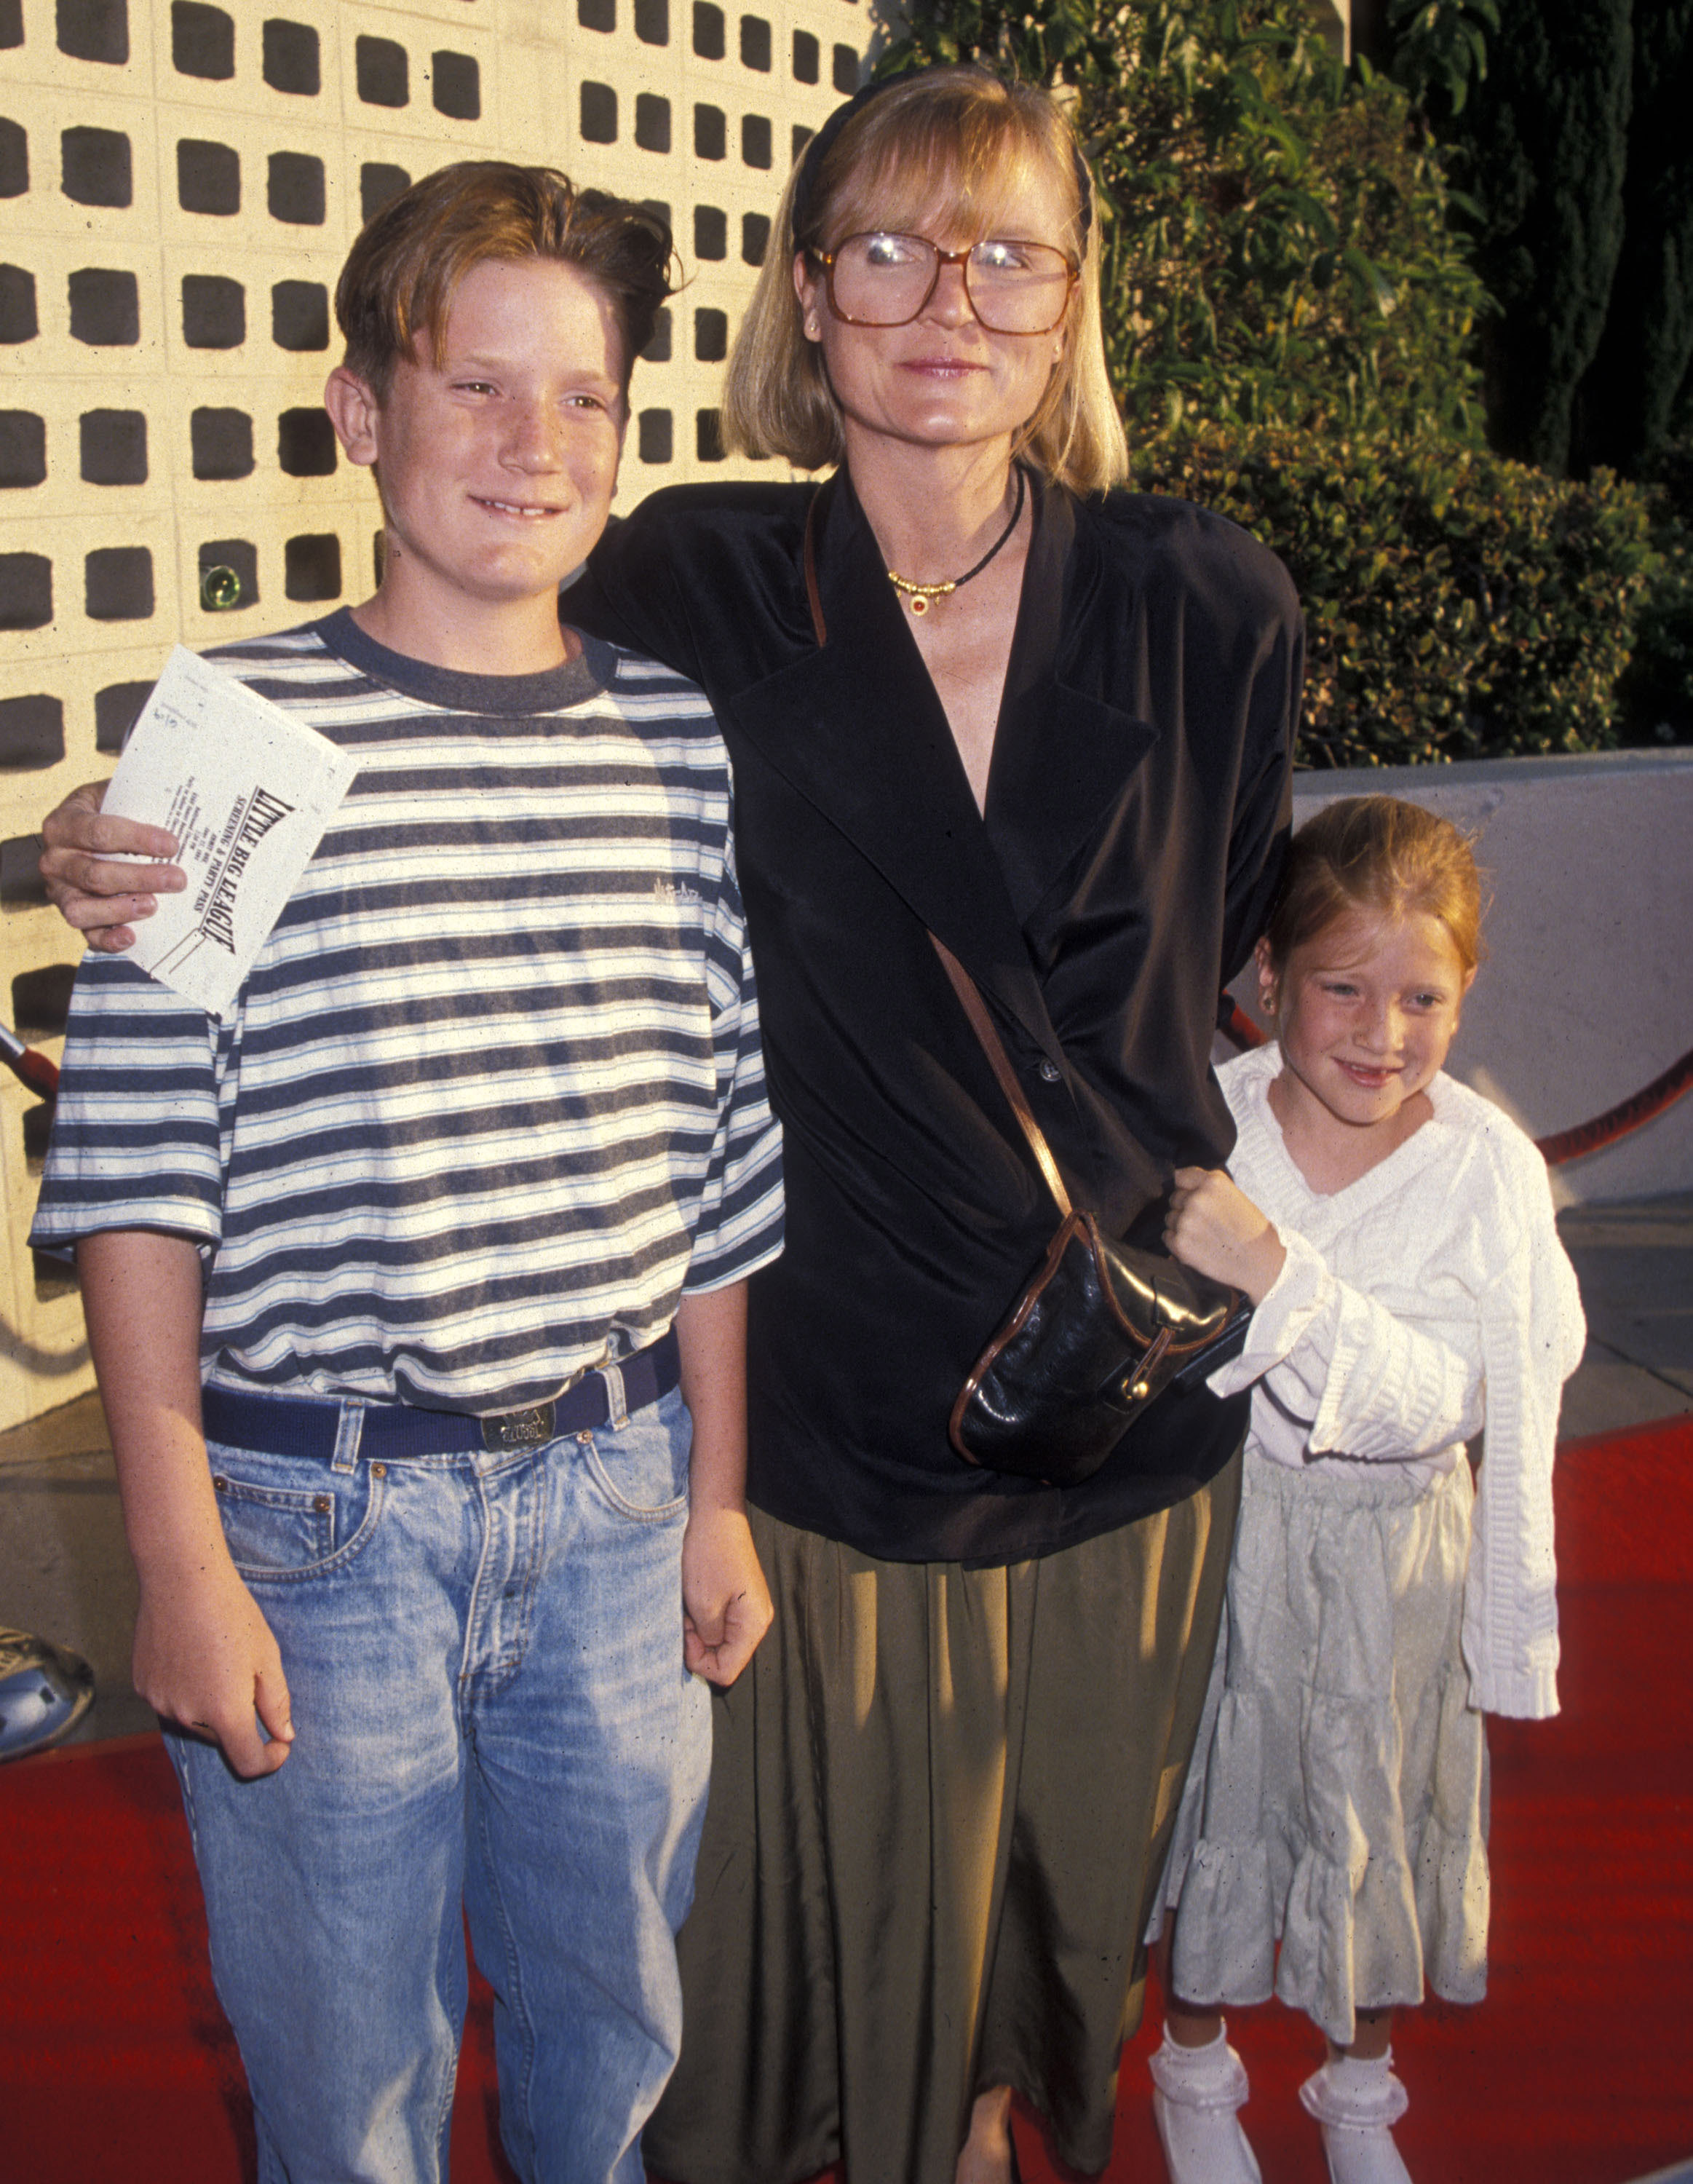 Daniel Weisman, Constance McCashin, and Marguerite Weisman at the "Little Big League" Hollywood Premiere on June 27, 1994, in Hollywood, California | Source: Getty Images